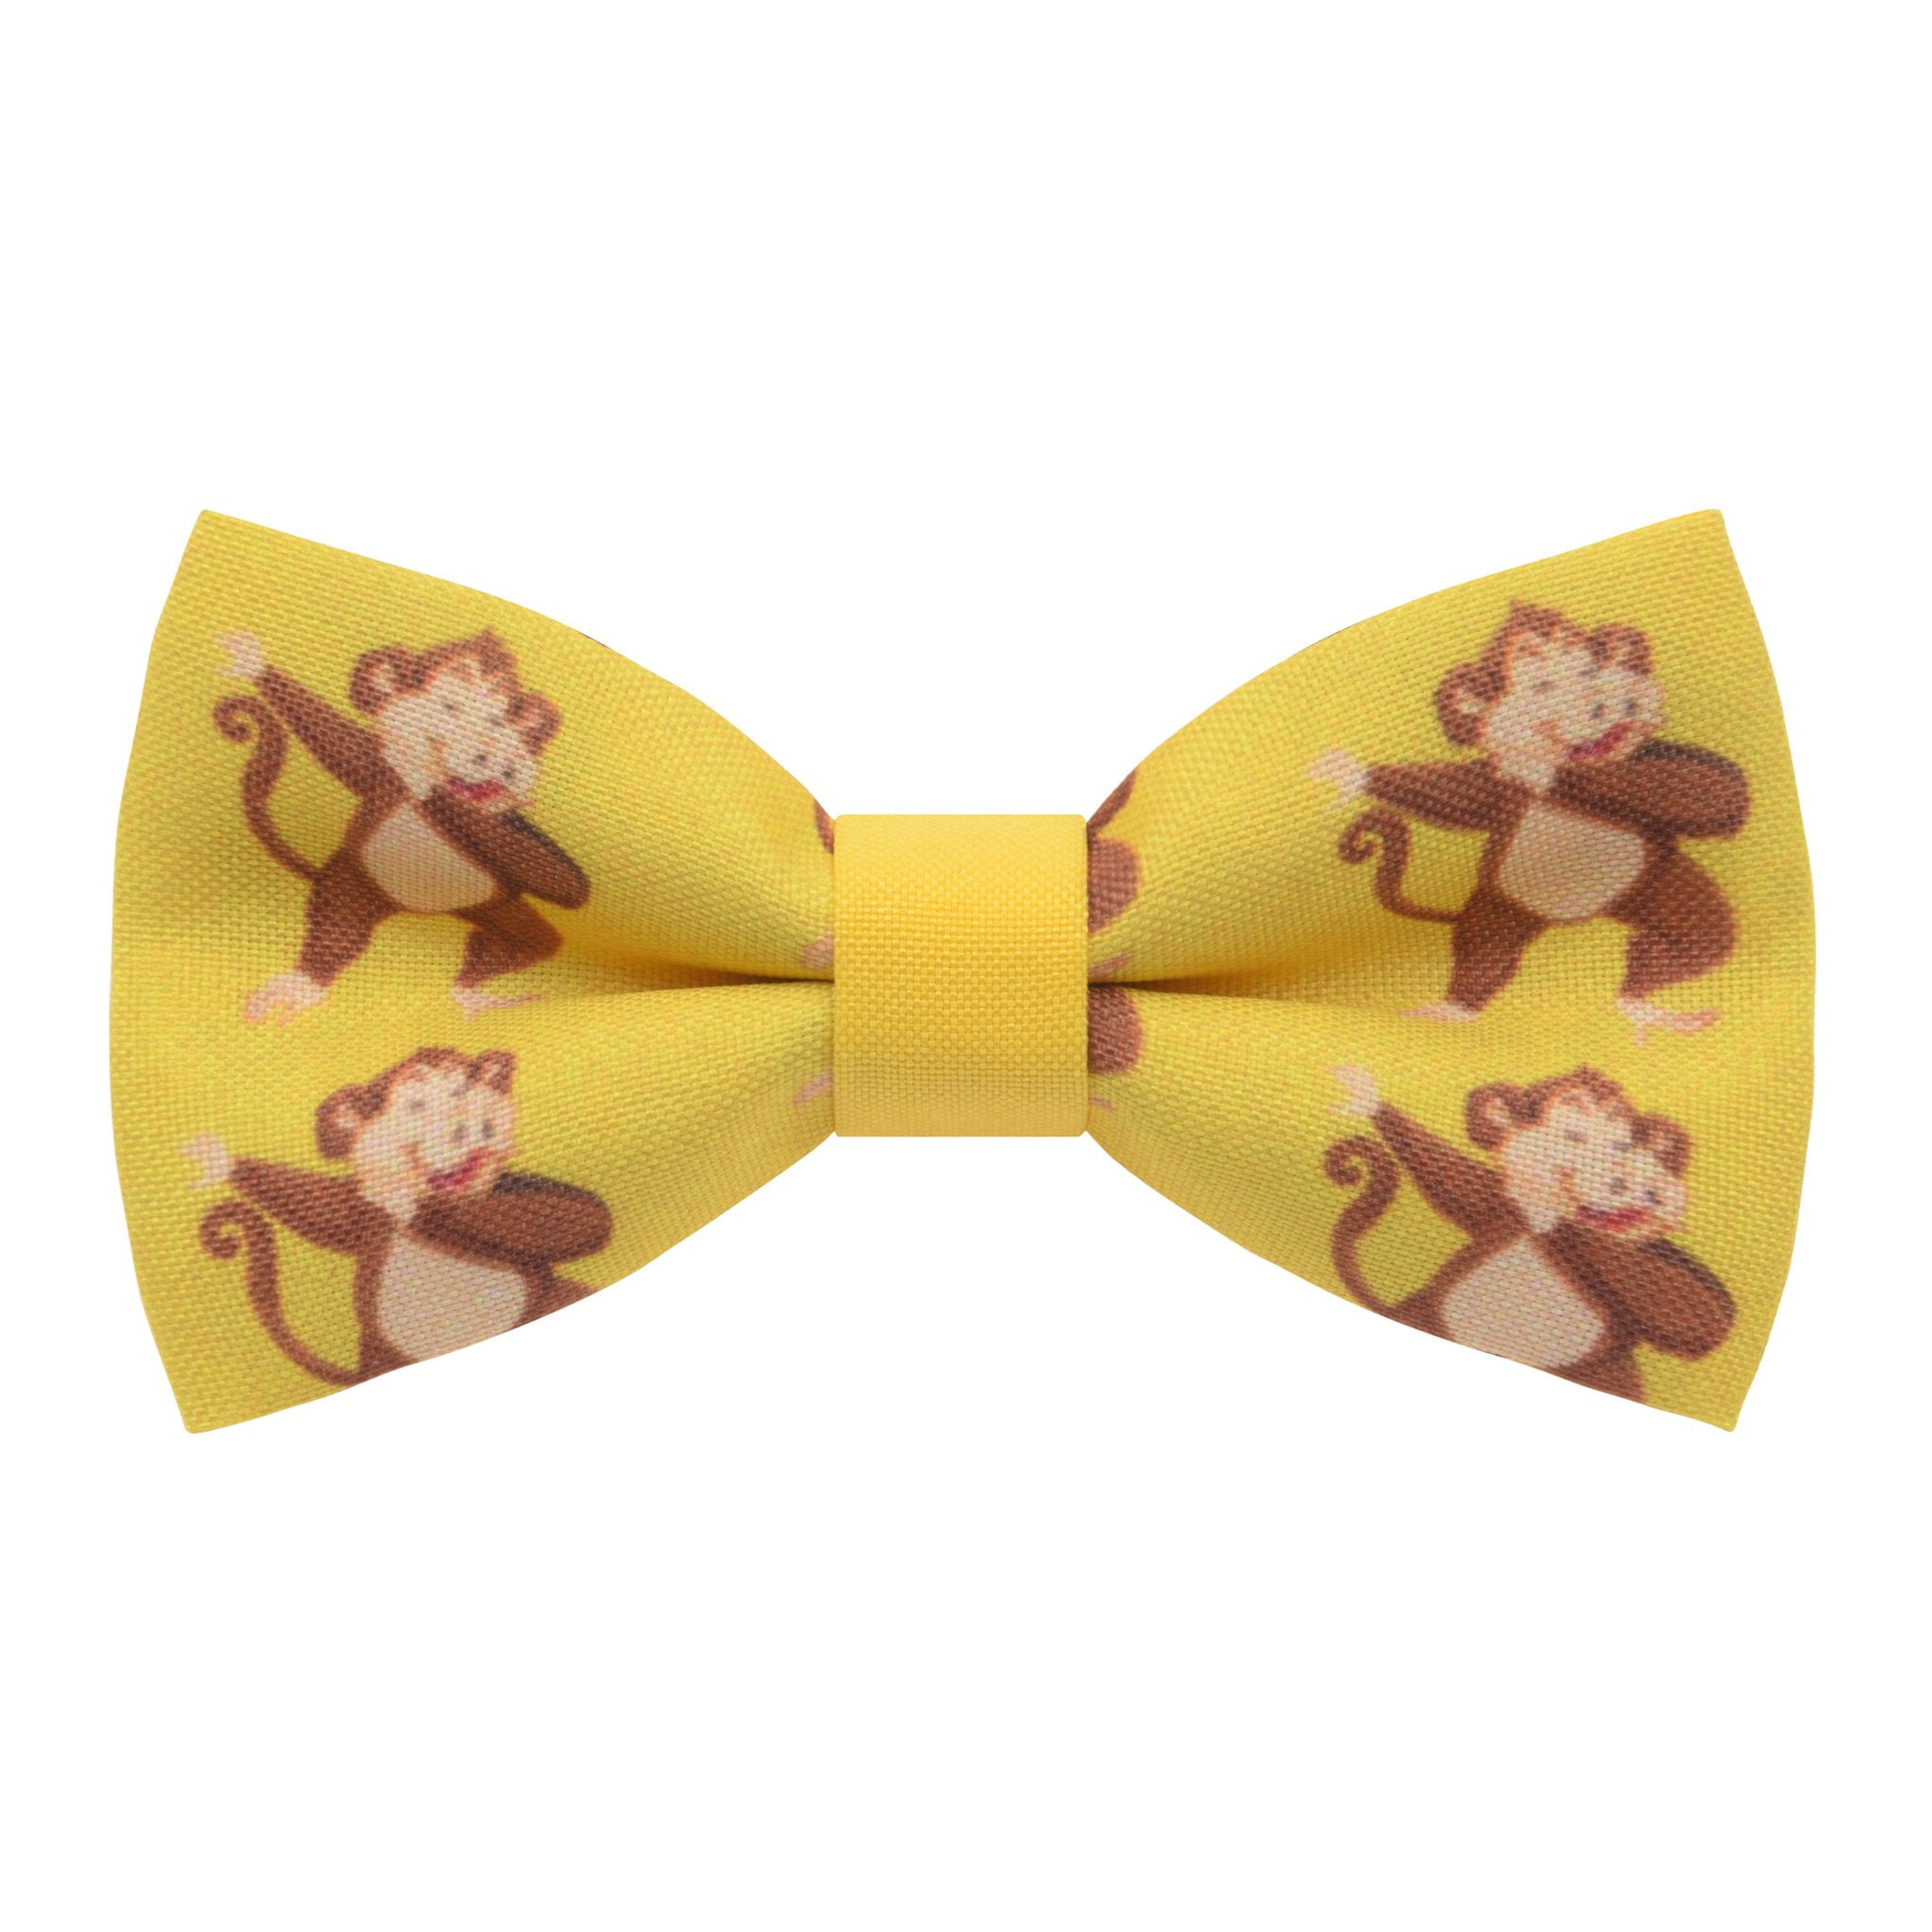 Bow Tie House Honey Bees bow tie pre-tied yellow-black color unisex pattern